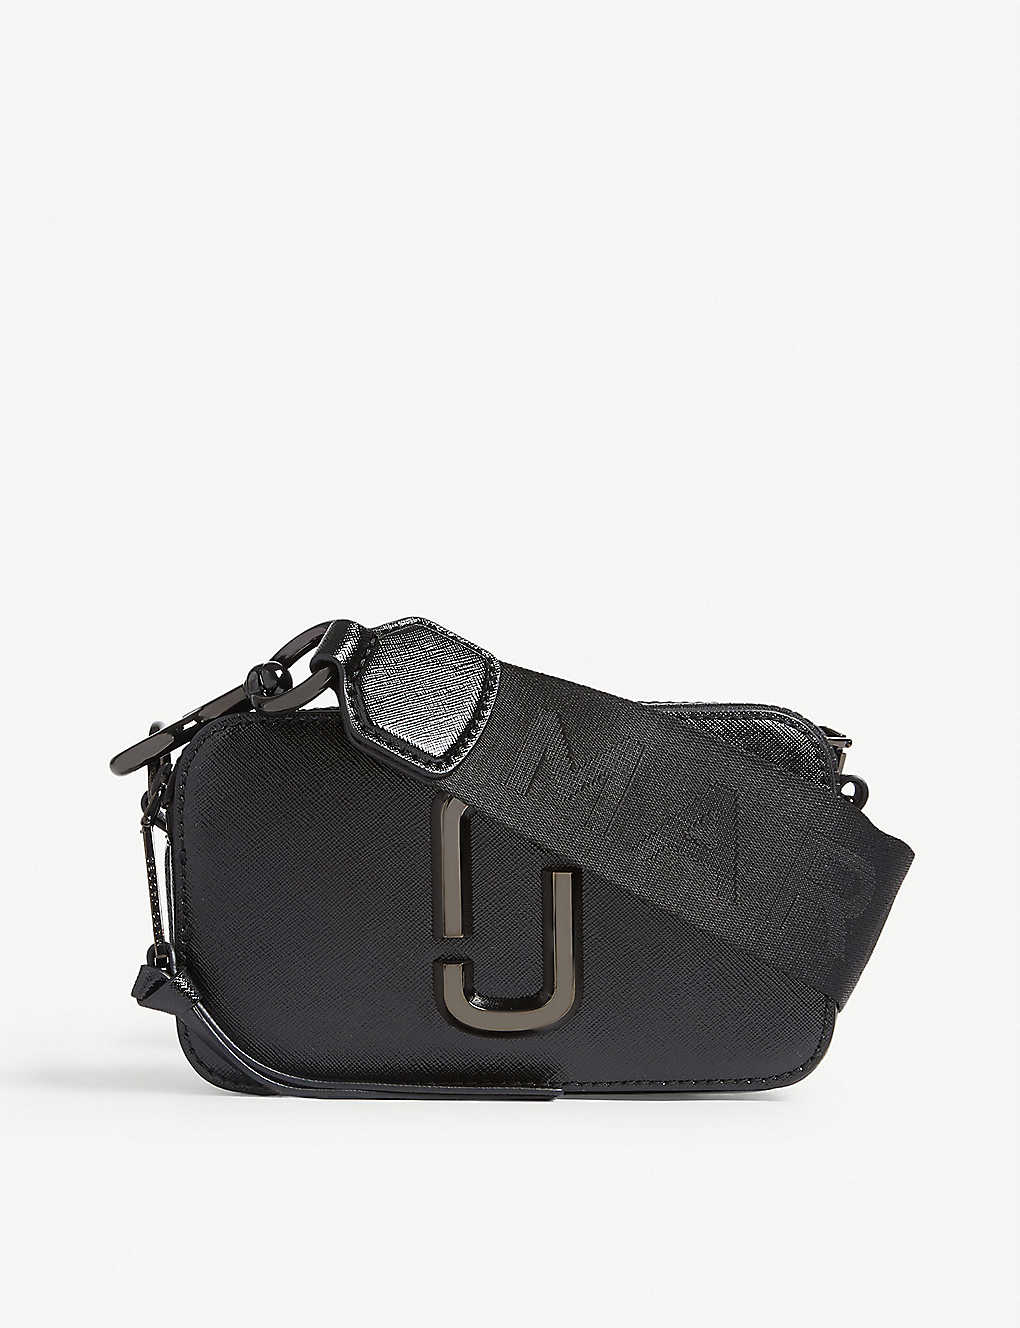 Marc Jacobs Snapshot Leather Cross-body Bag in Black